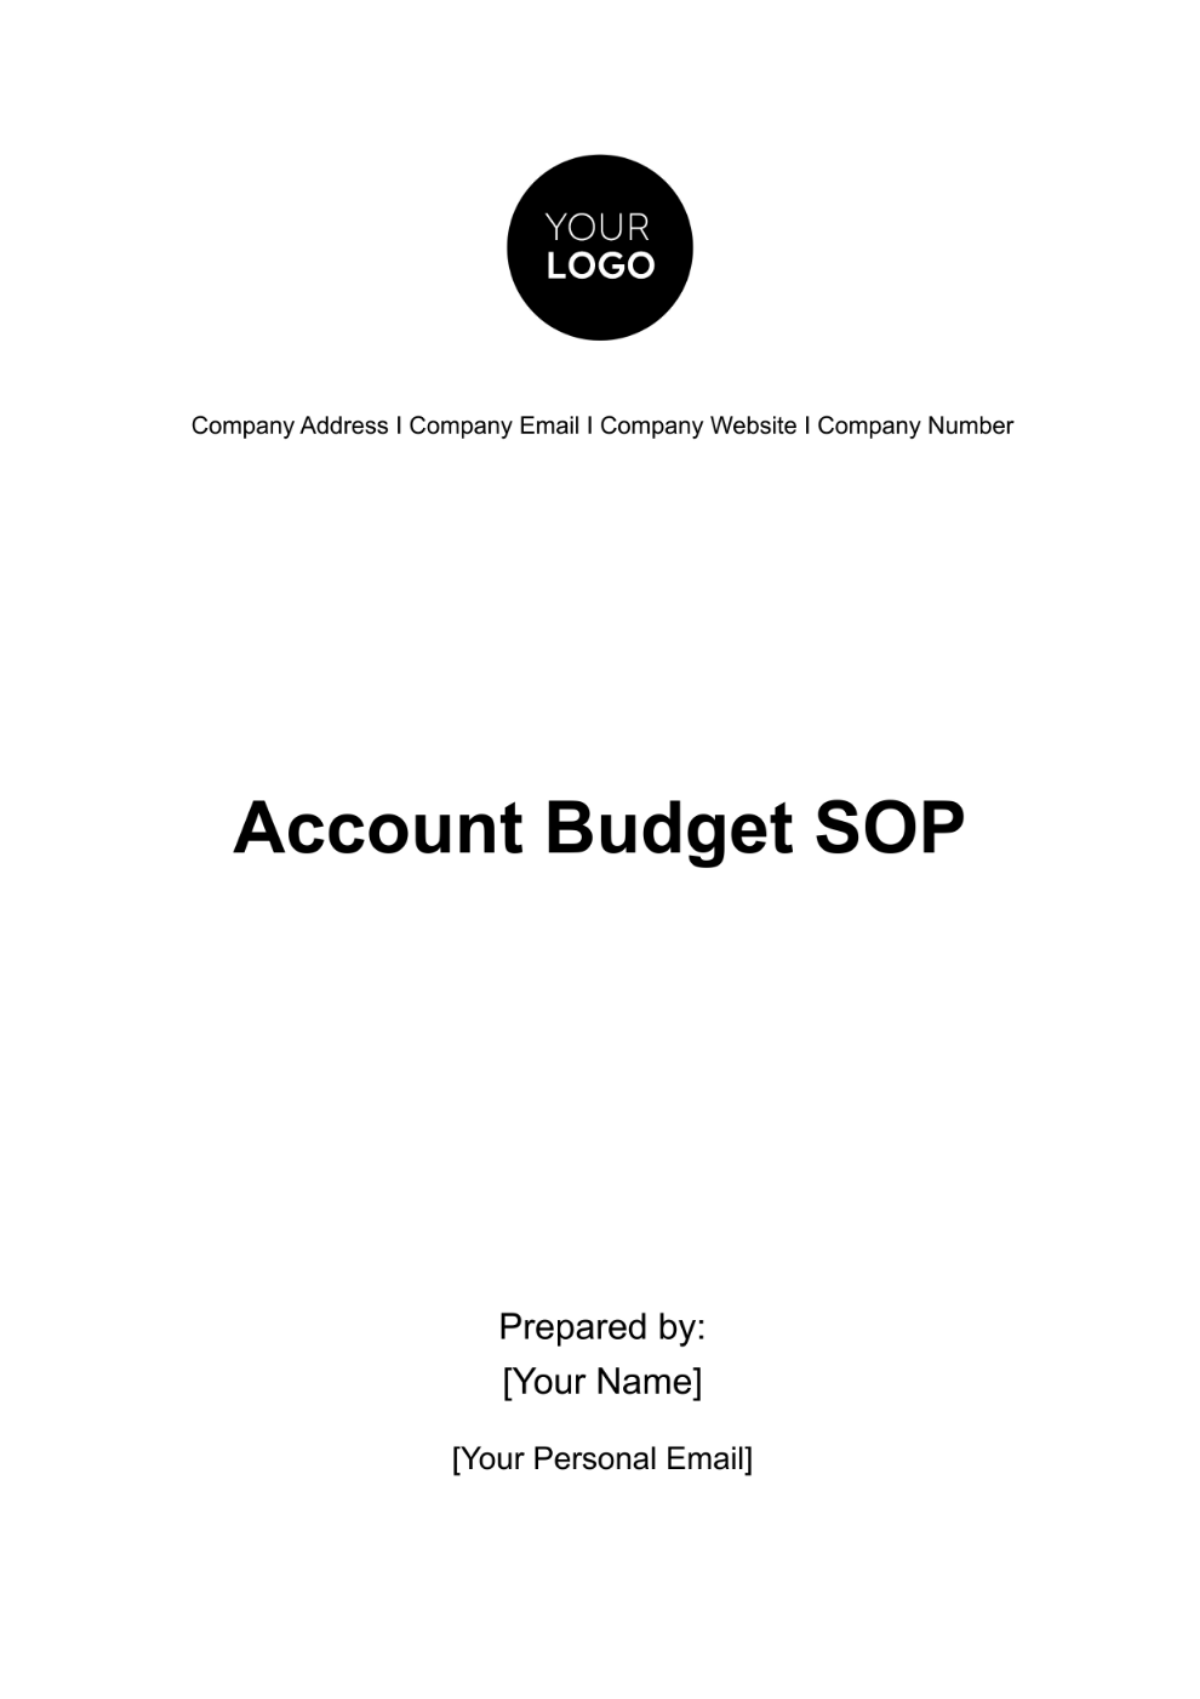 Free Account Budget SOP Template